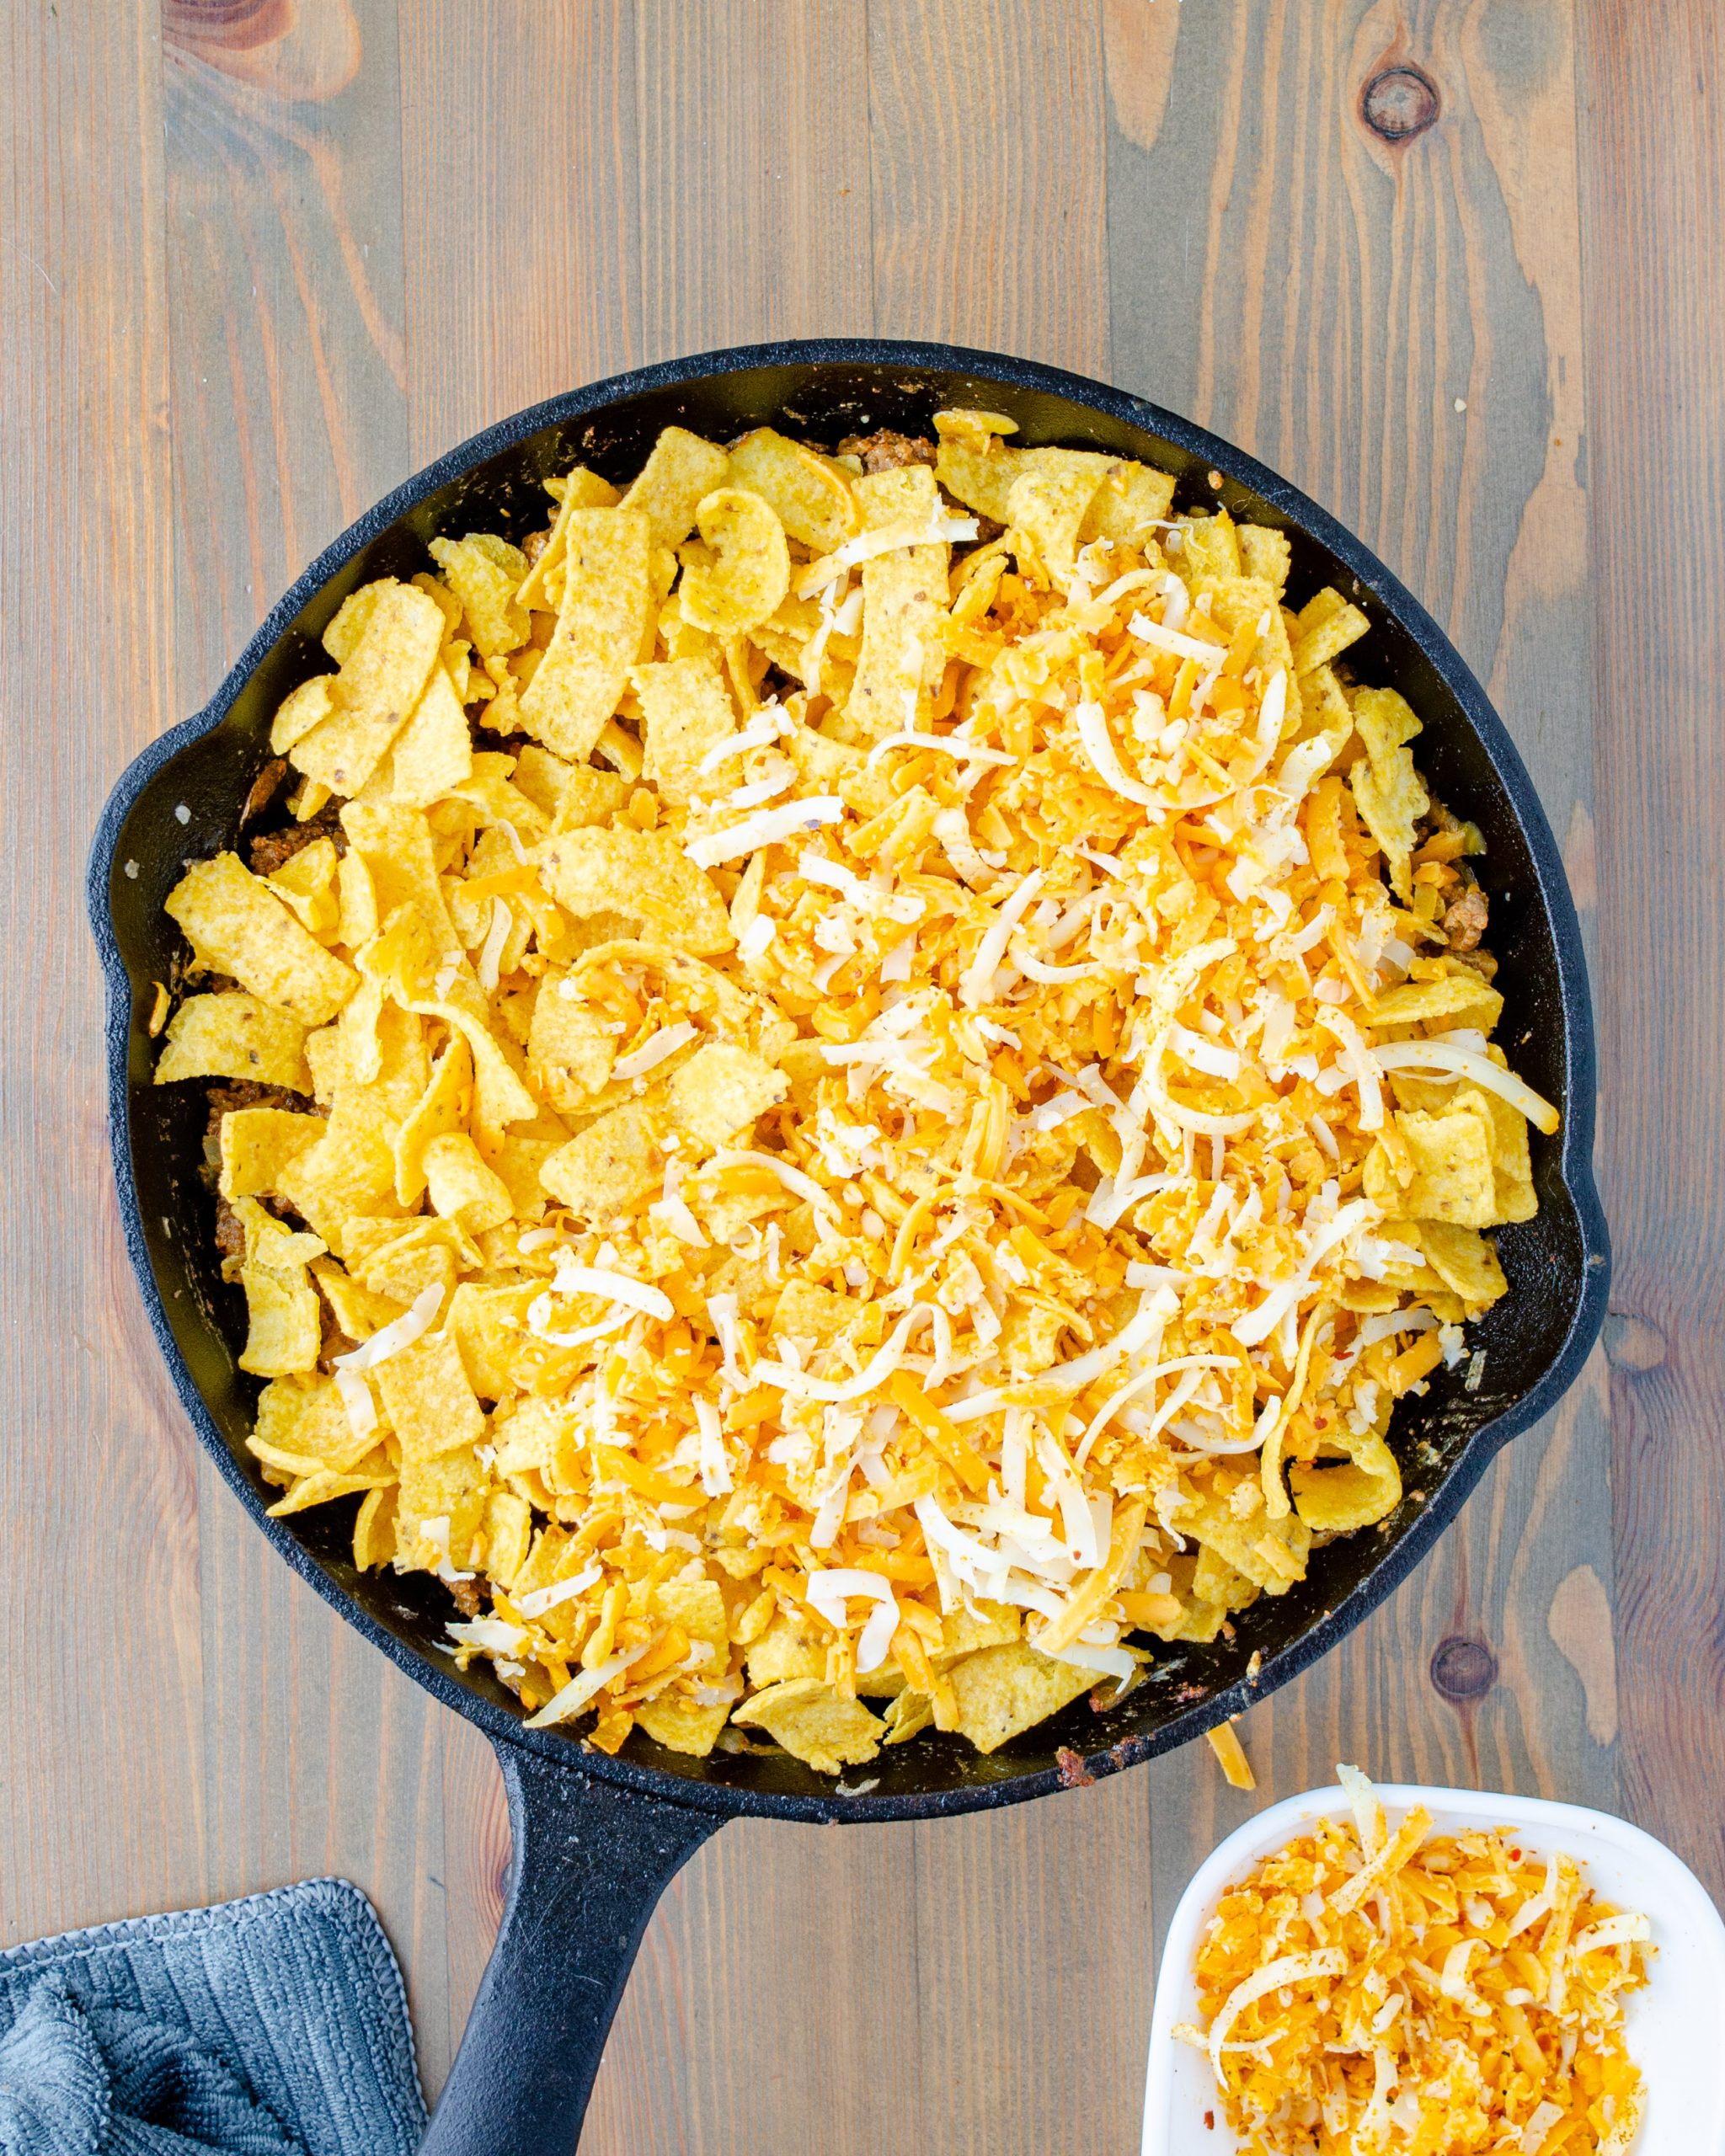 Top the mixture with the corn chips